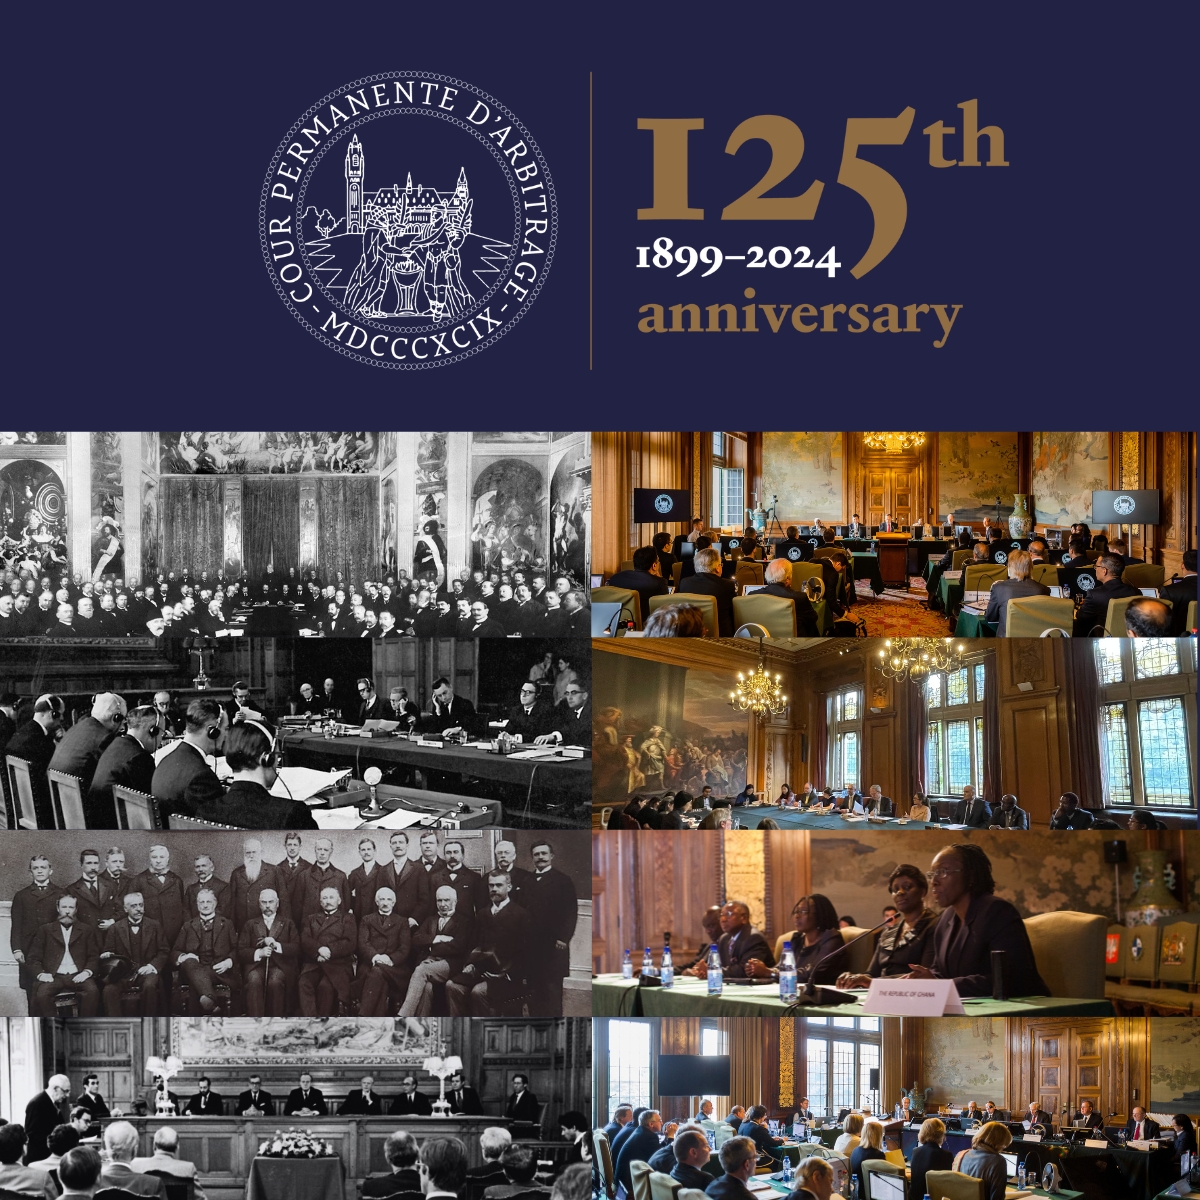 🔸 #PCA Press release - The #PCA celebrates its 125th Anniversary in 2024🔸 2024 marks the 125th Anniversary of the PCA, which was established in 1899 during the First #HaguePeaceConference. 📄To access the full press release issued today by the #PCA ➡ bit.ly/4bEfKB0